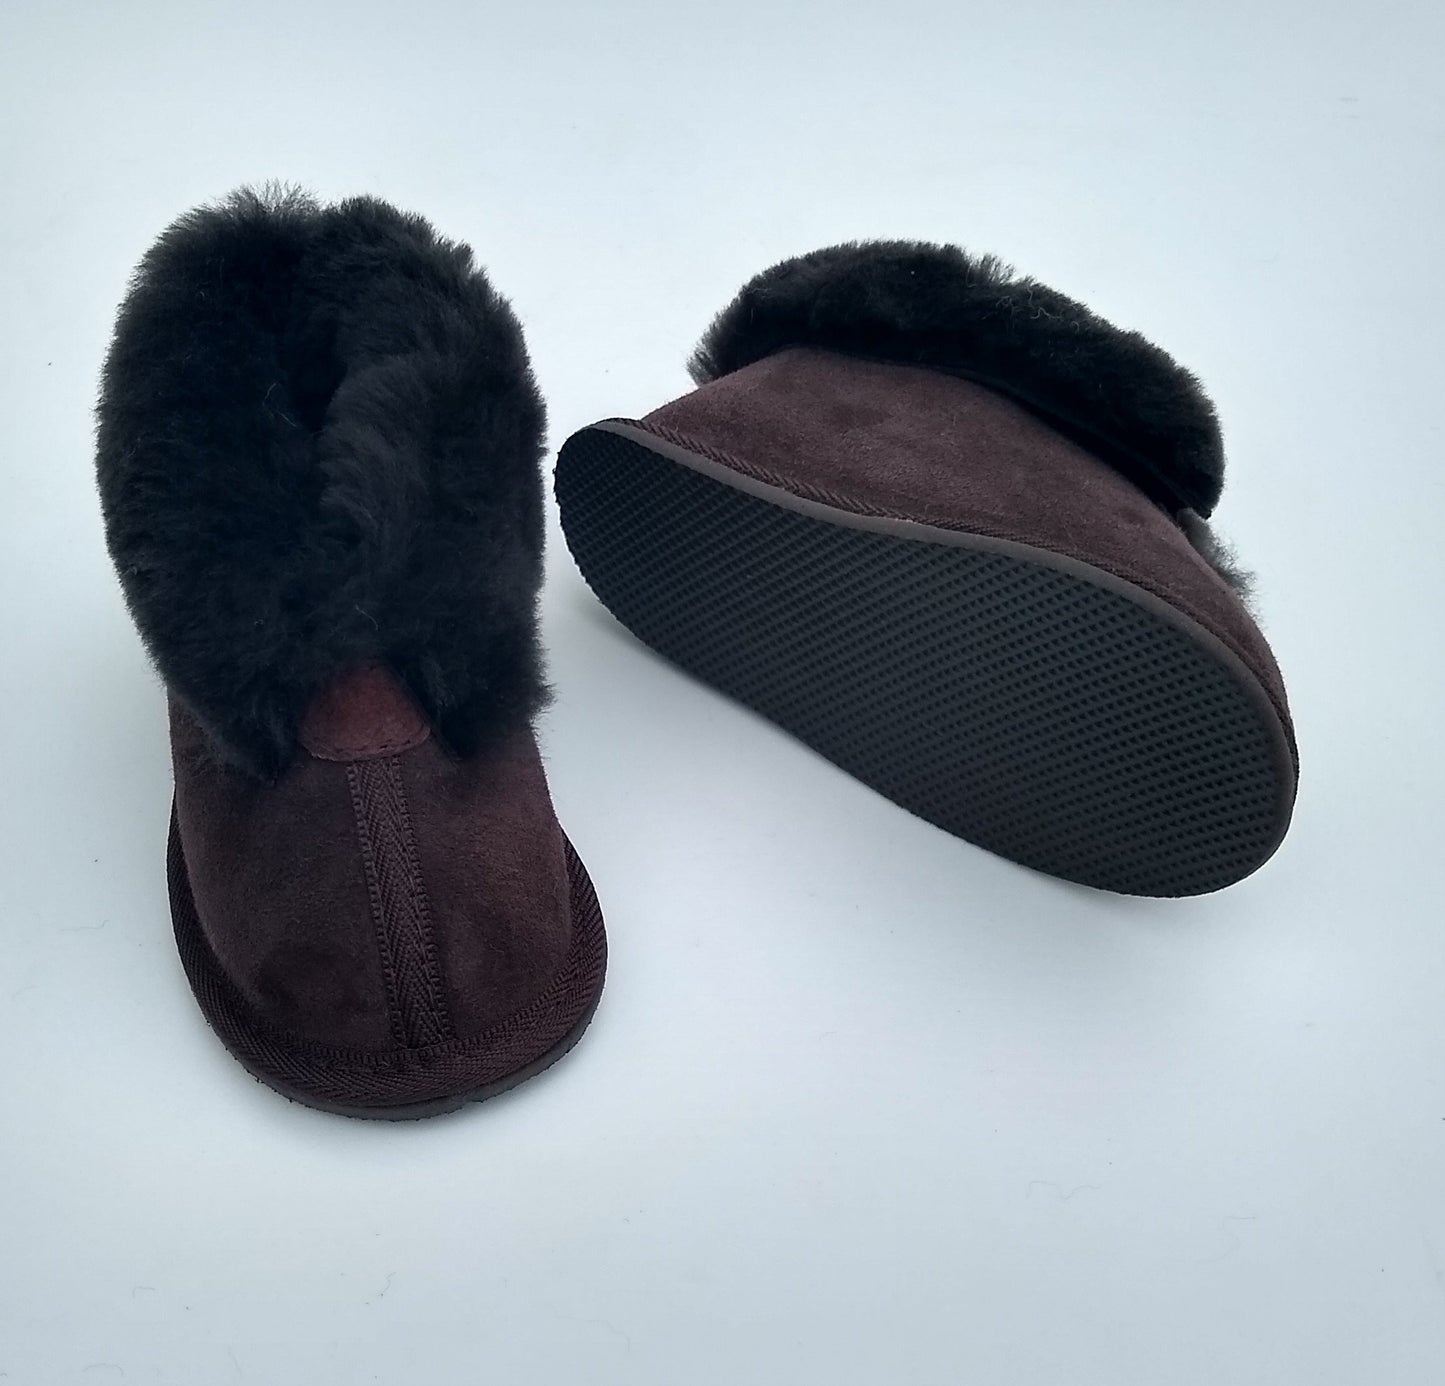 MORGAN CHILD'S SLIPPER - Woolshed Gallery